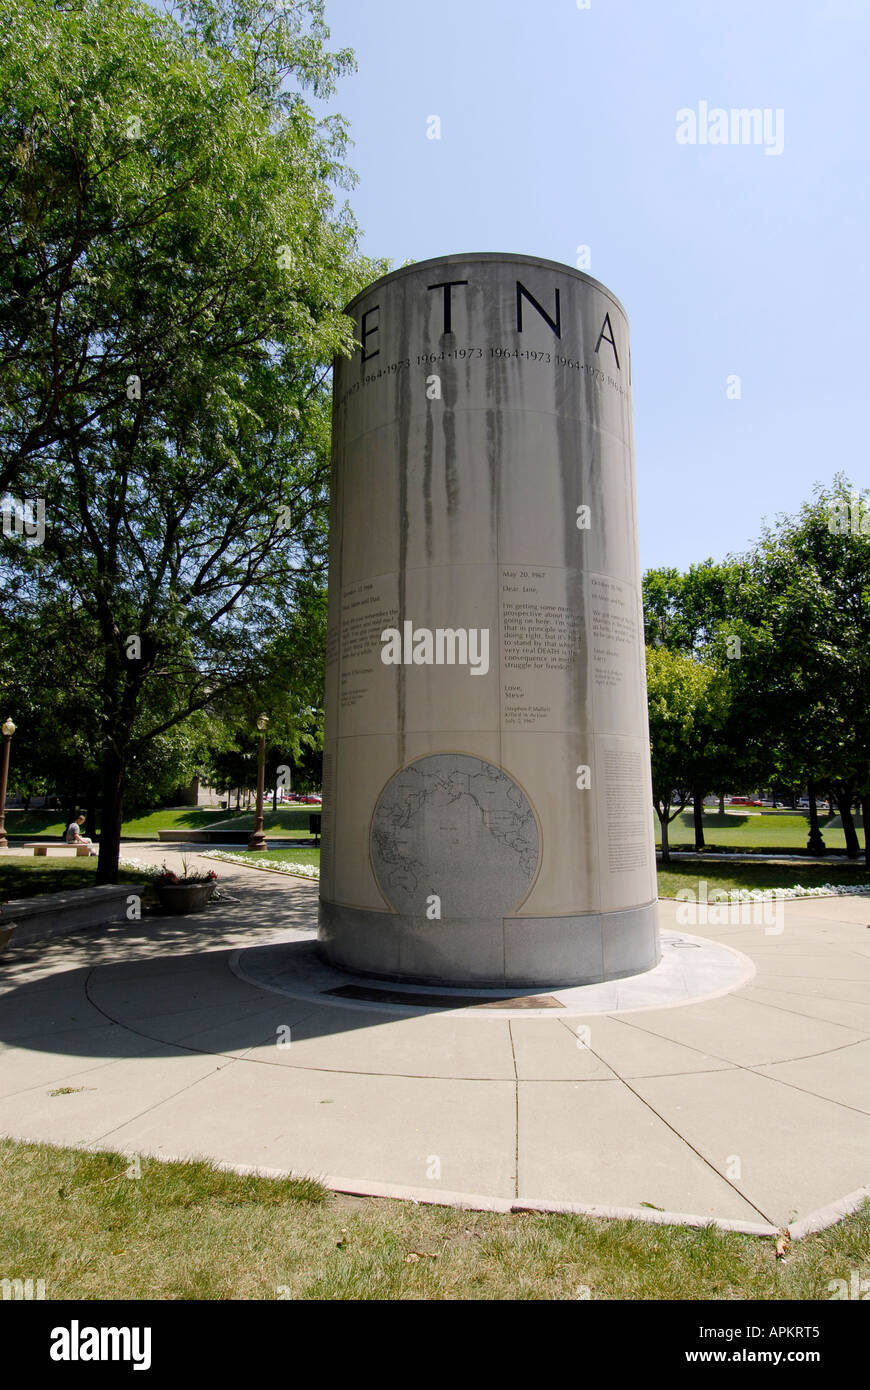 Vietnam Memorial at University Park commemorate the War history downtown Indianapolis Indiana IN Stock Photo